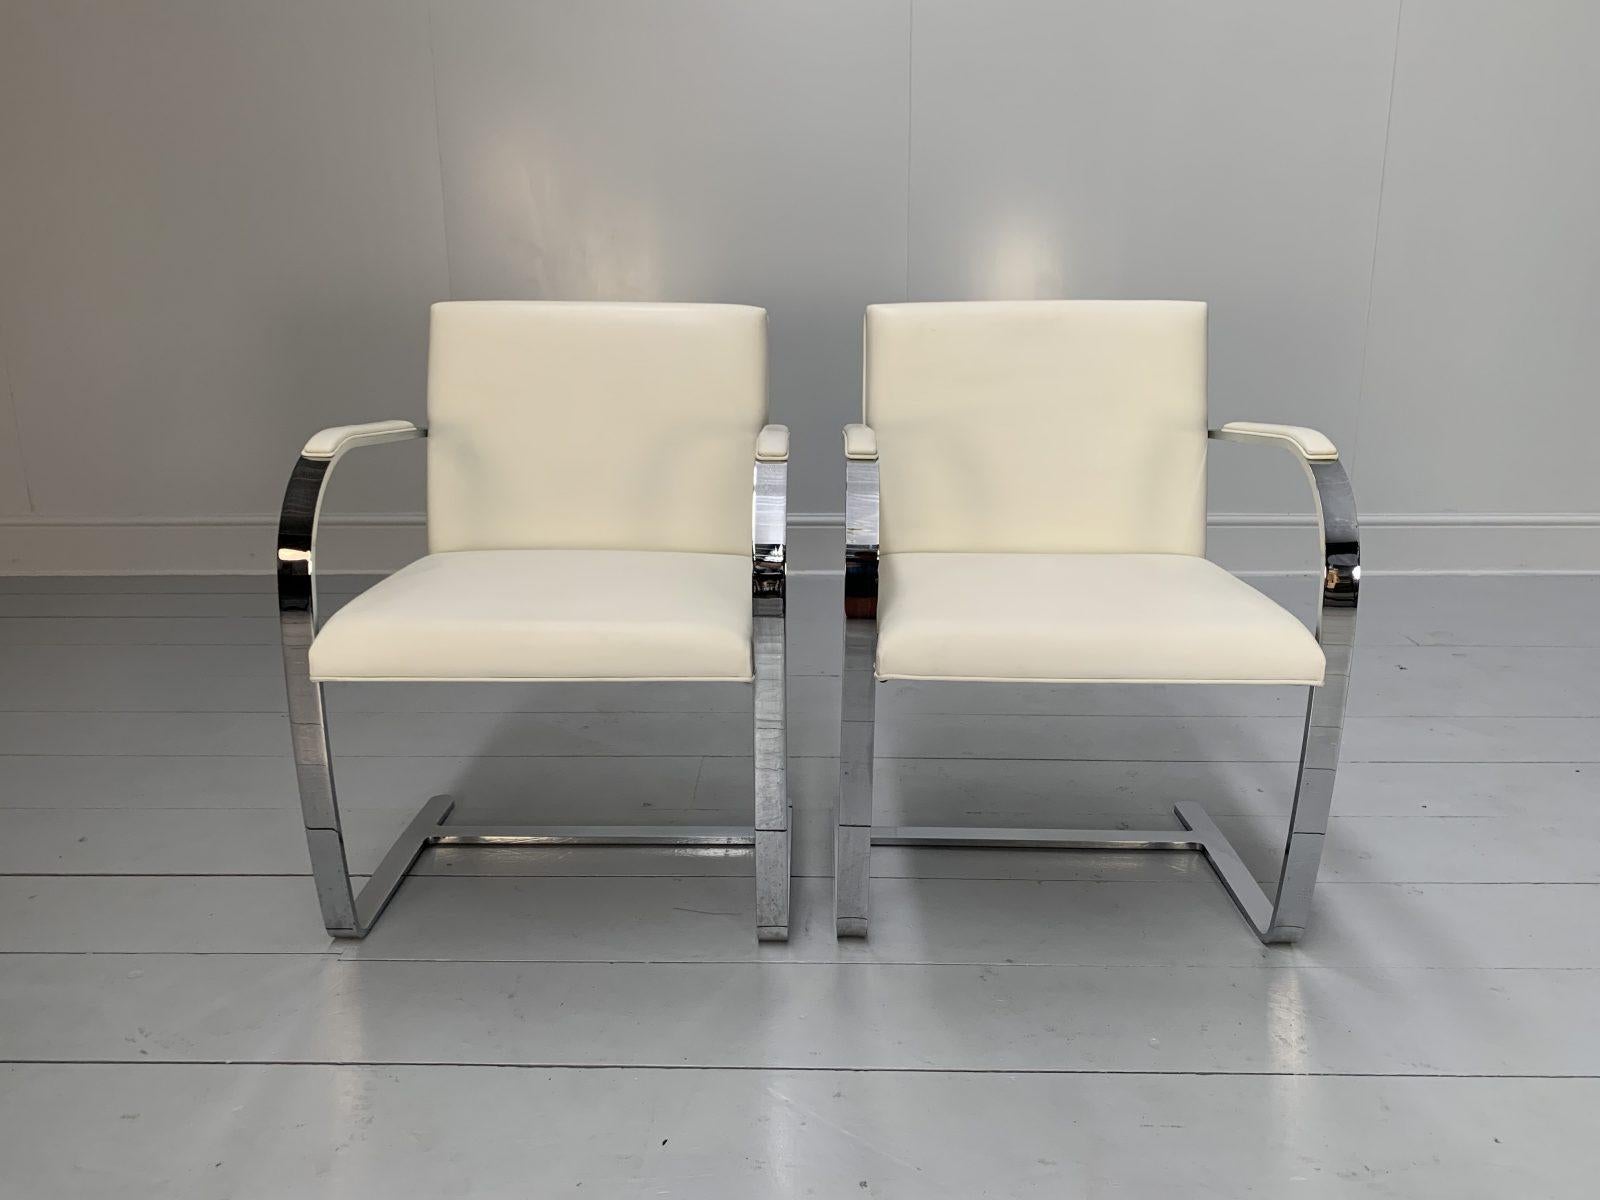 This is a sublime, immaculately-presented, original pair of “Brno Flat Bar” Armchairs with Arm Pads in White Leather, manufactured by the leading Furniture manufacturer, Knoll Studio.

In a world of temporary pleasures, Knoll Studio creates